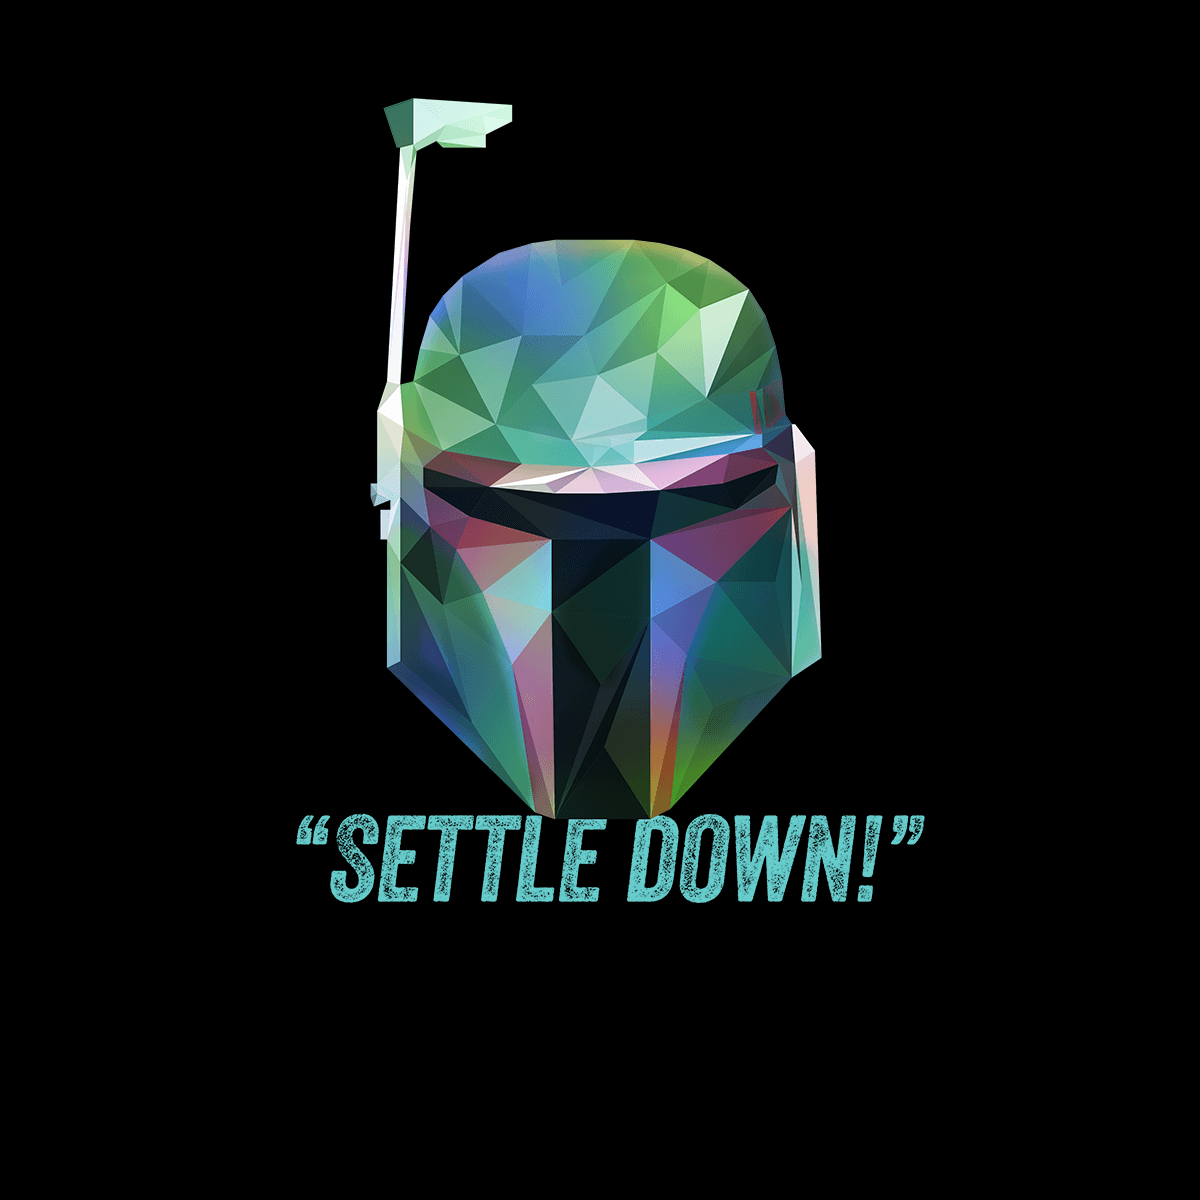 Boba Fett Settle Down Famous Star Wars character quote Unisex Movie Tank Top - Kuzi Tees